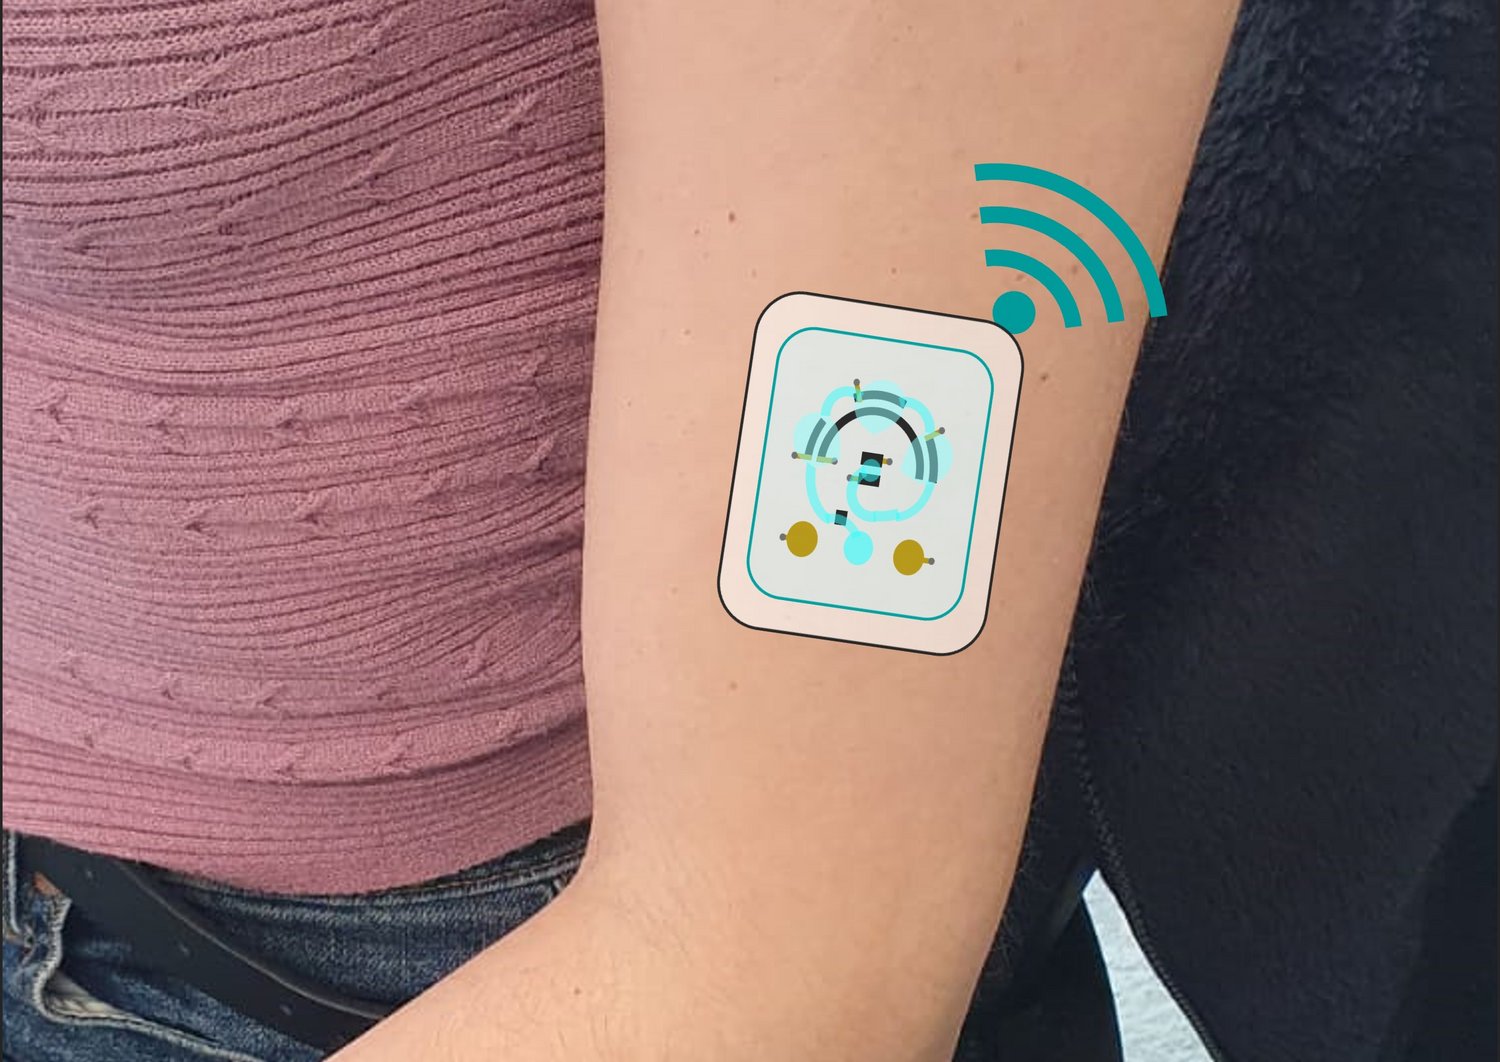 Concept image of an electronic patch on the arm